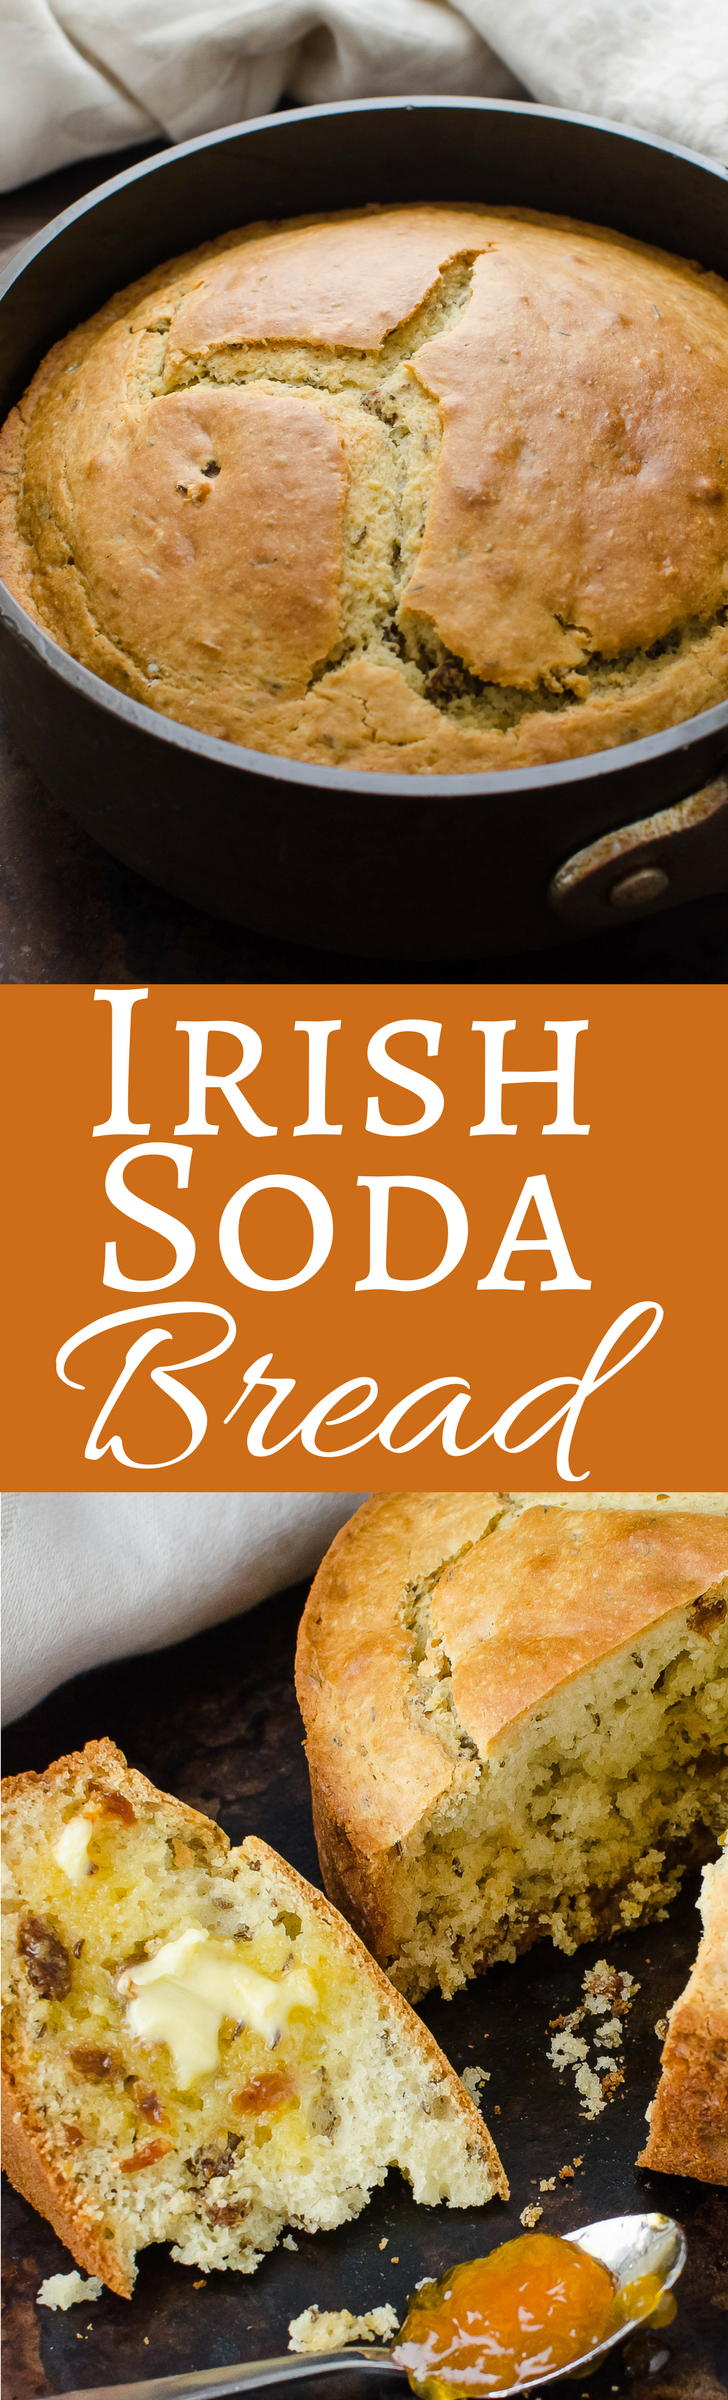 This simple recipe for Irish Soda Bread is slightly sweet with caraway and golden raisins. Great for breakfast or with a soup or stew!